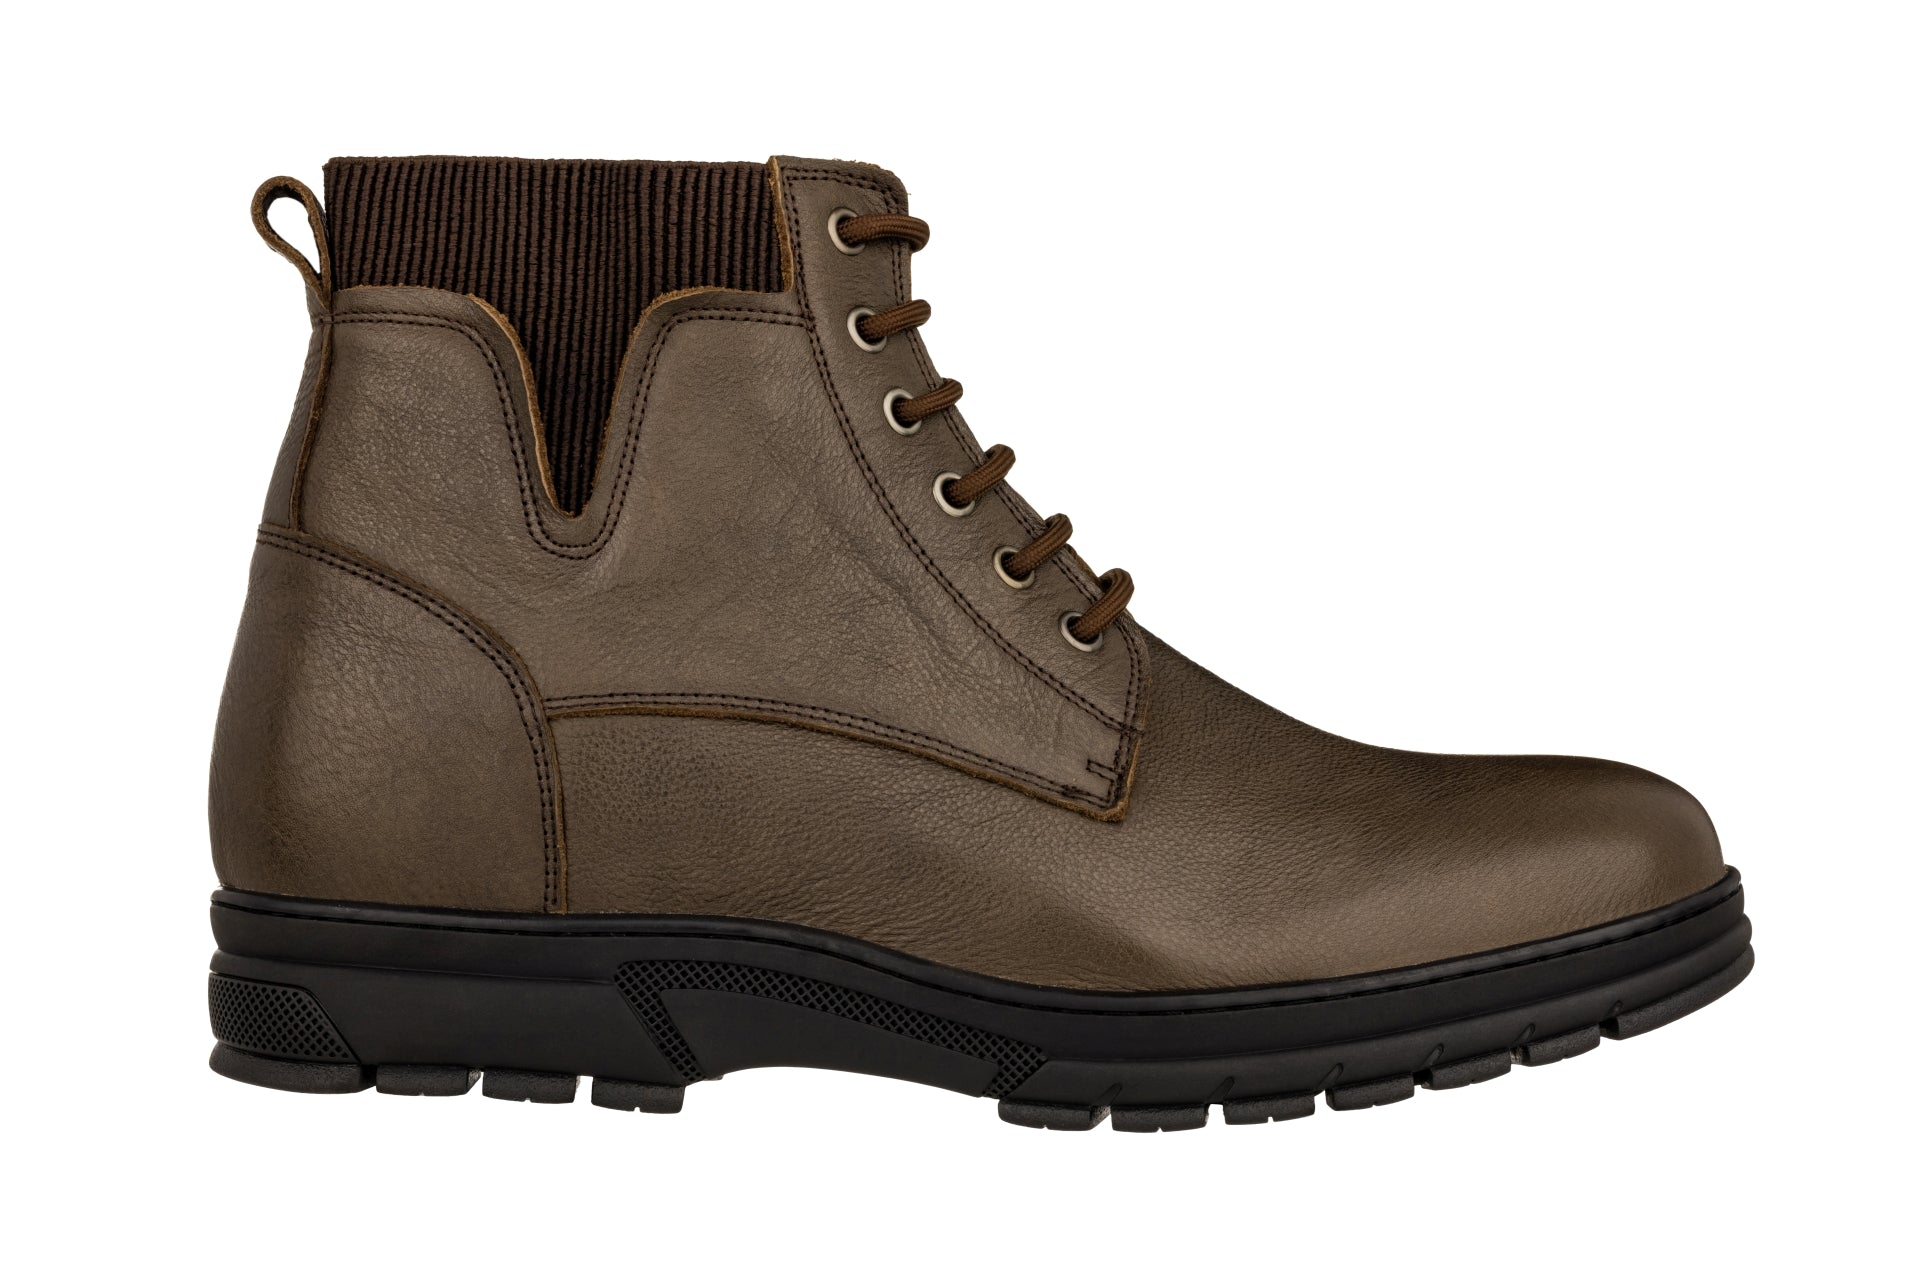 Elevator shoes height increase TOTO - K84016 - 2.8 Inches Taller (Chocolate Brown) - High Top Work Boots